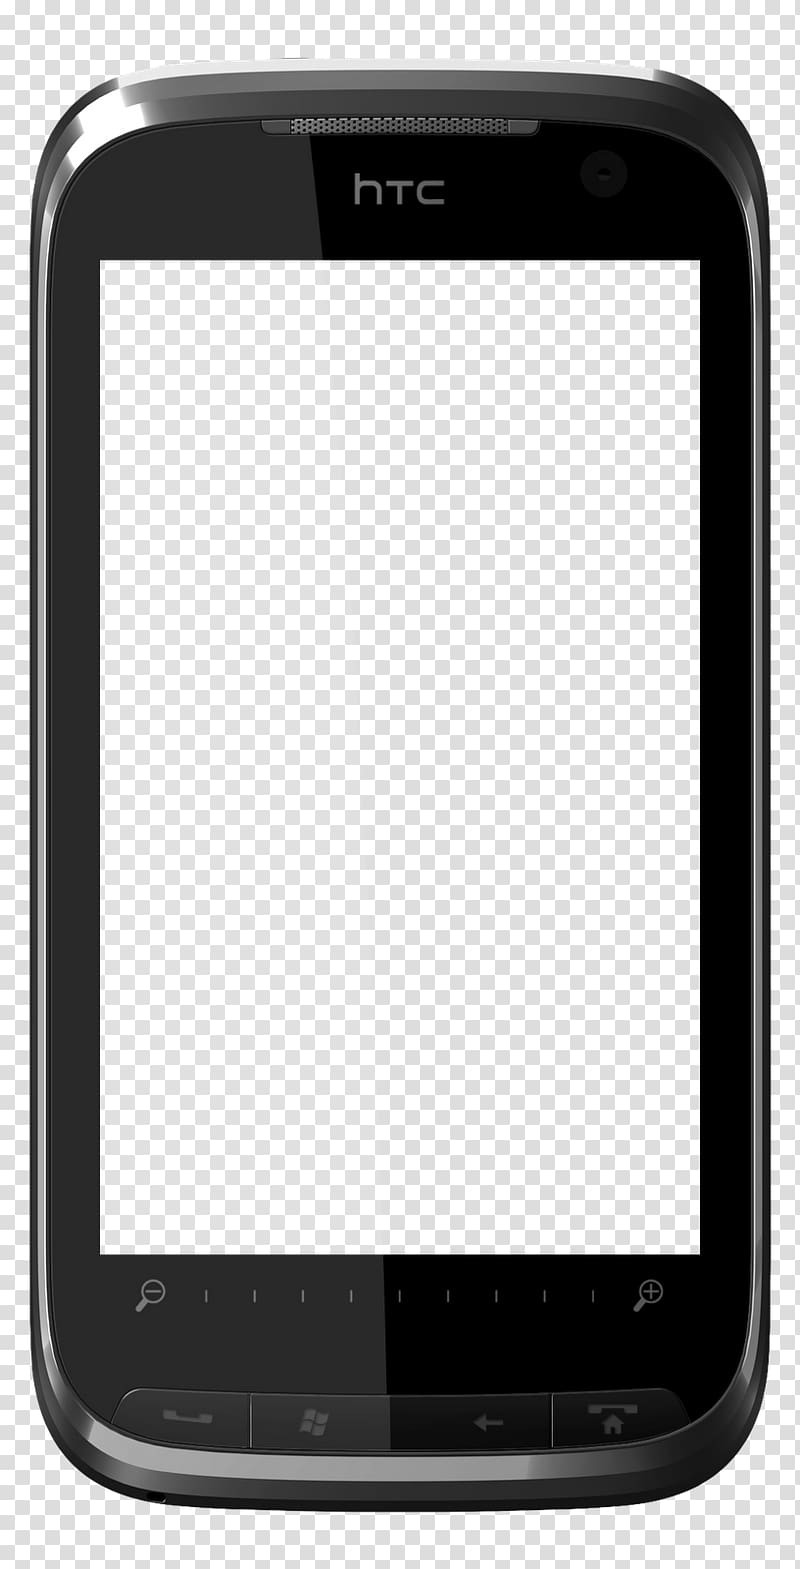 iPhone 4 Telephone Smartphone , TELEFONO transparent background PNG clipart